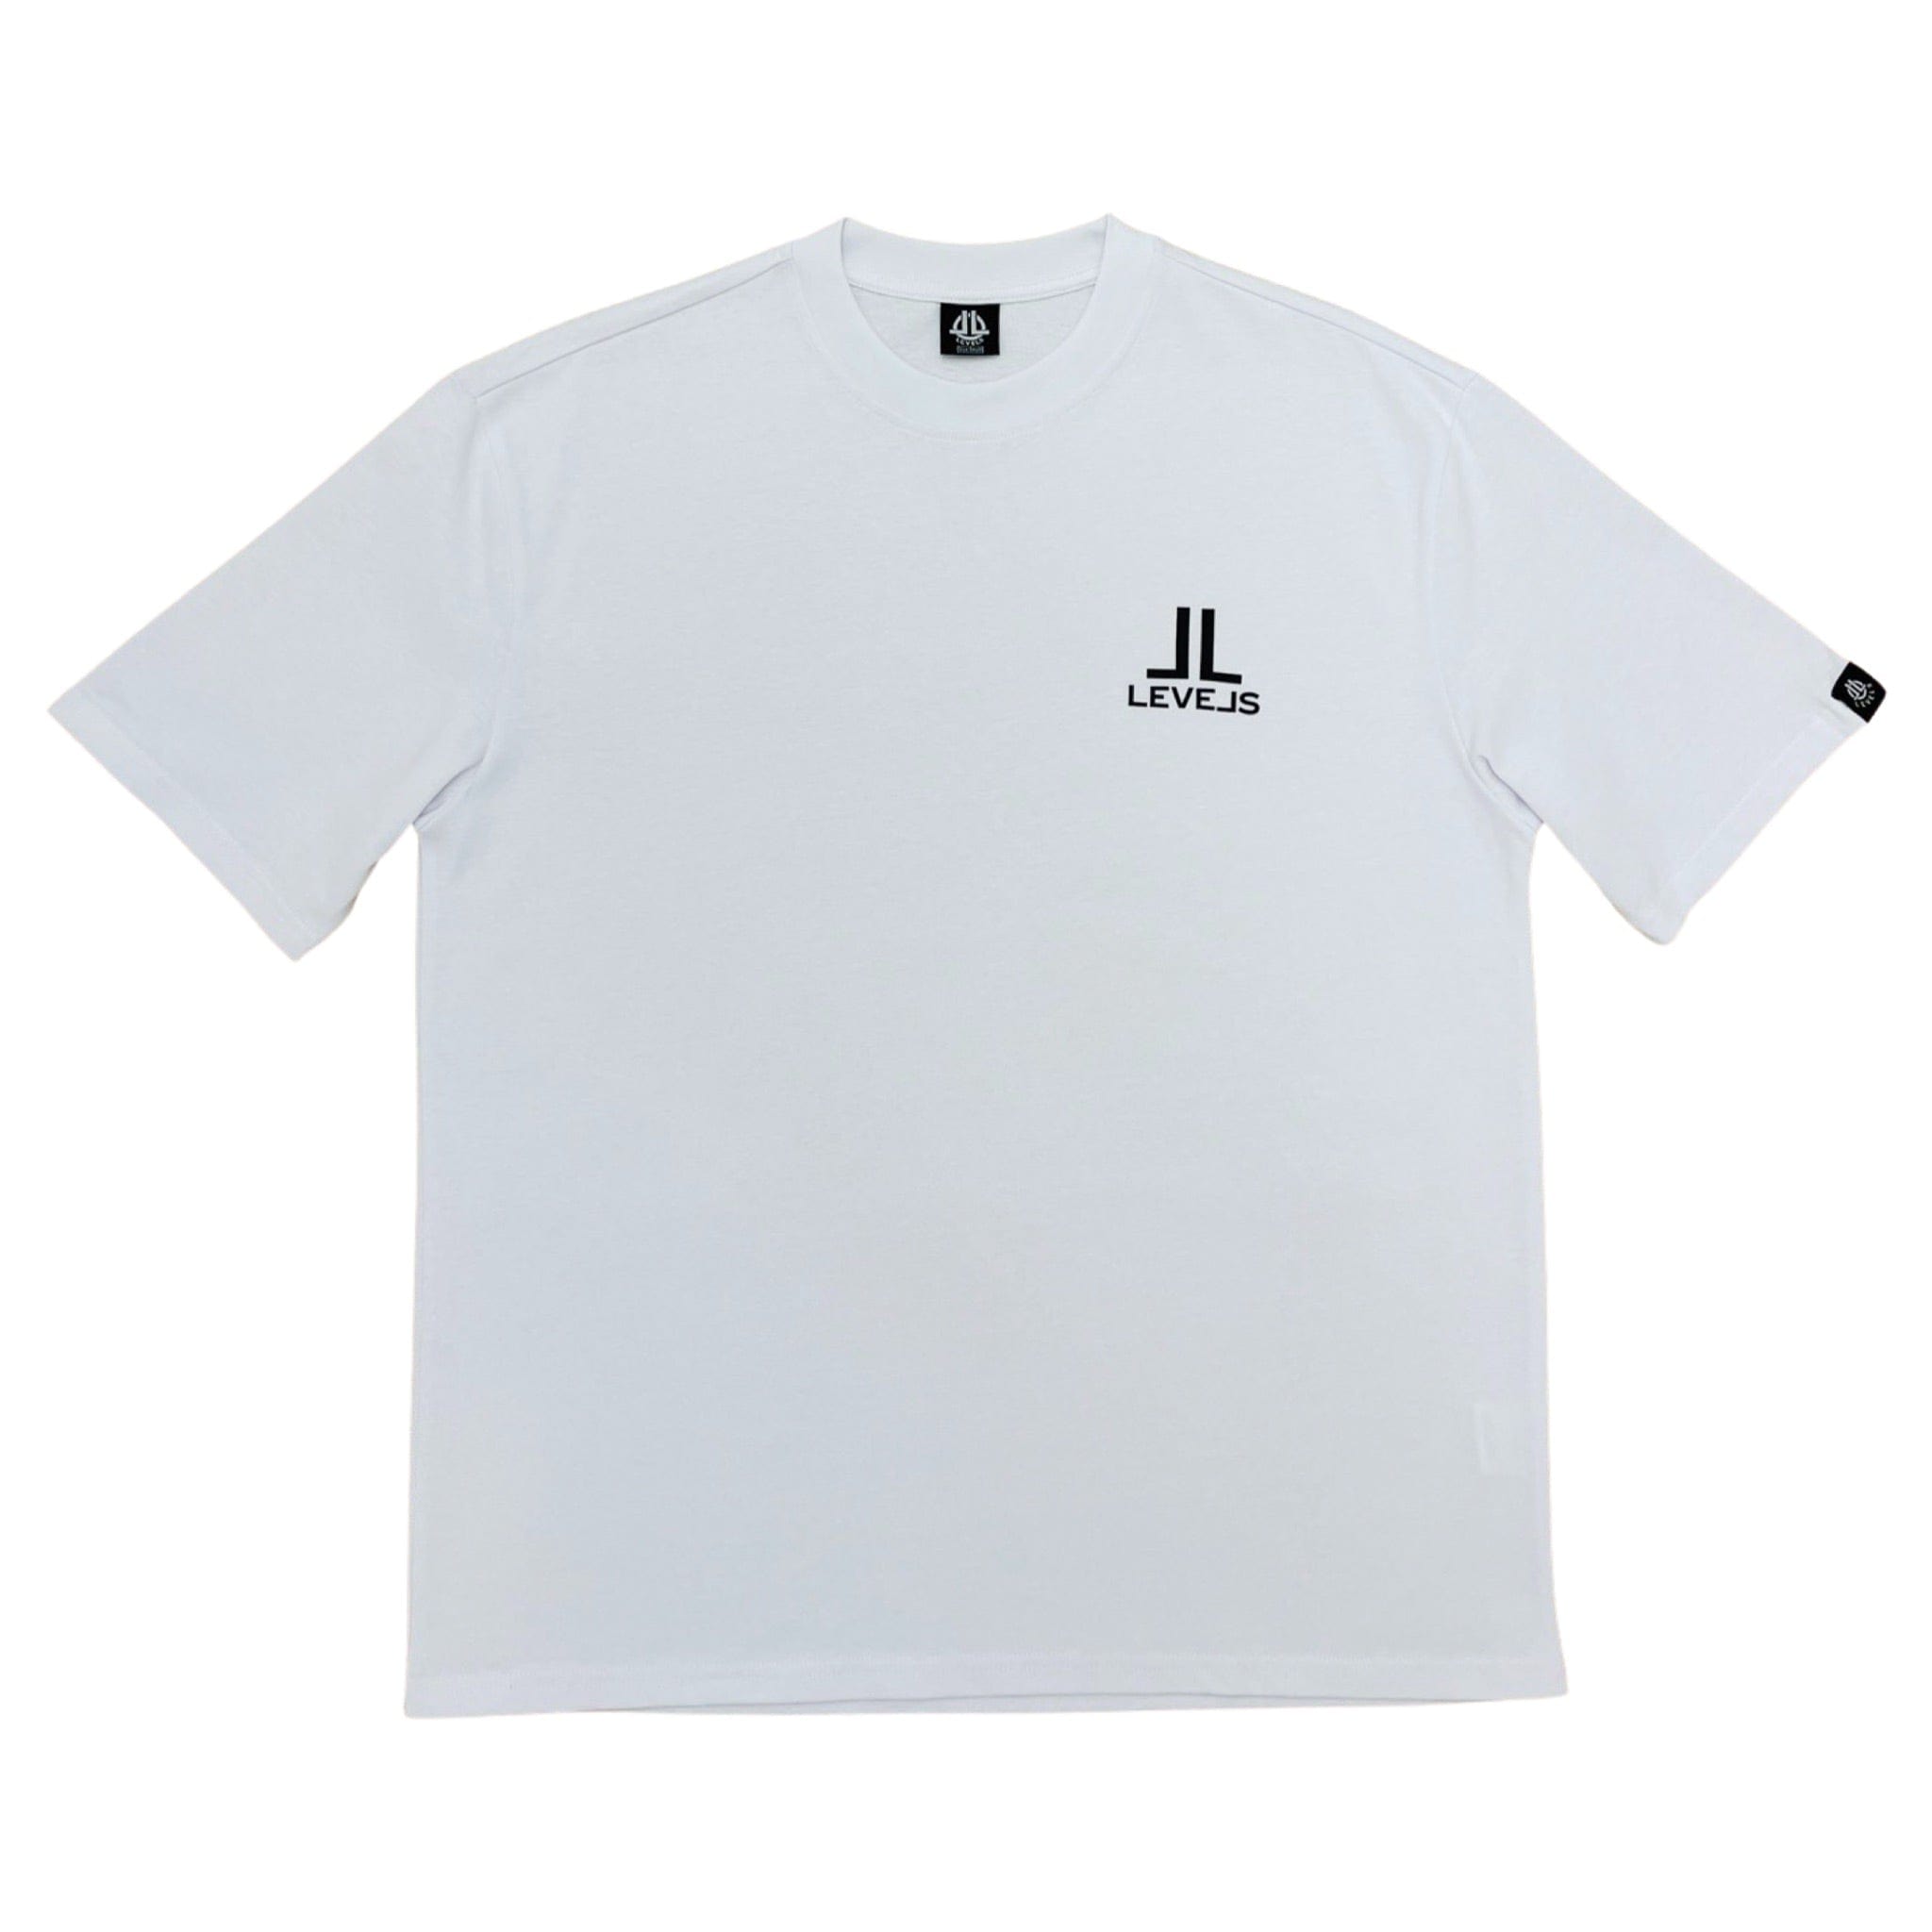 LEVELS, LLC Apparel & Accessories LUXE LEVELS OVERSIZED TEE (WHITE)